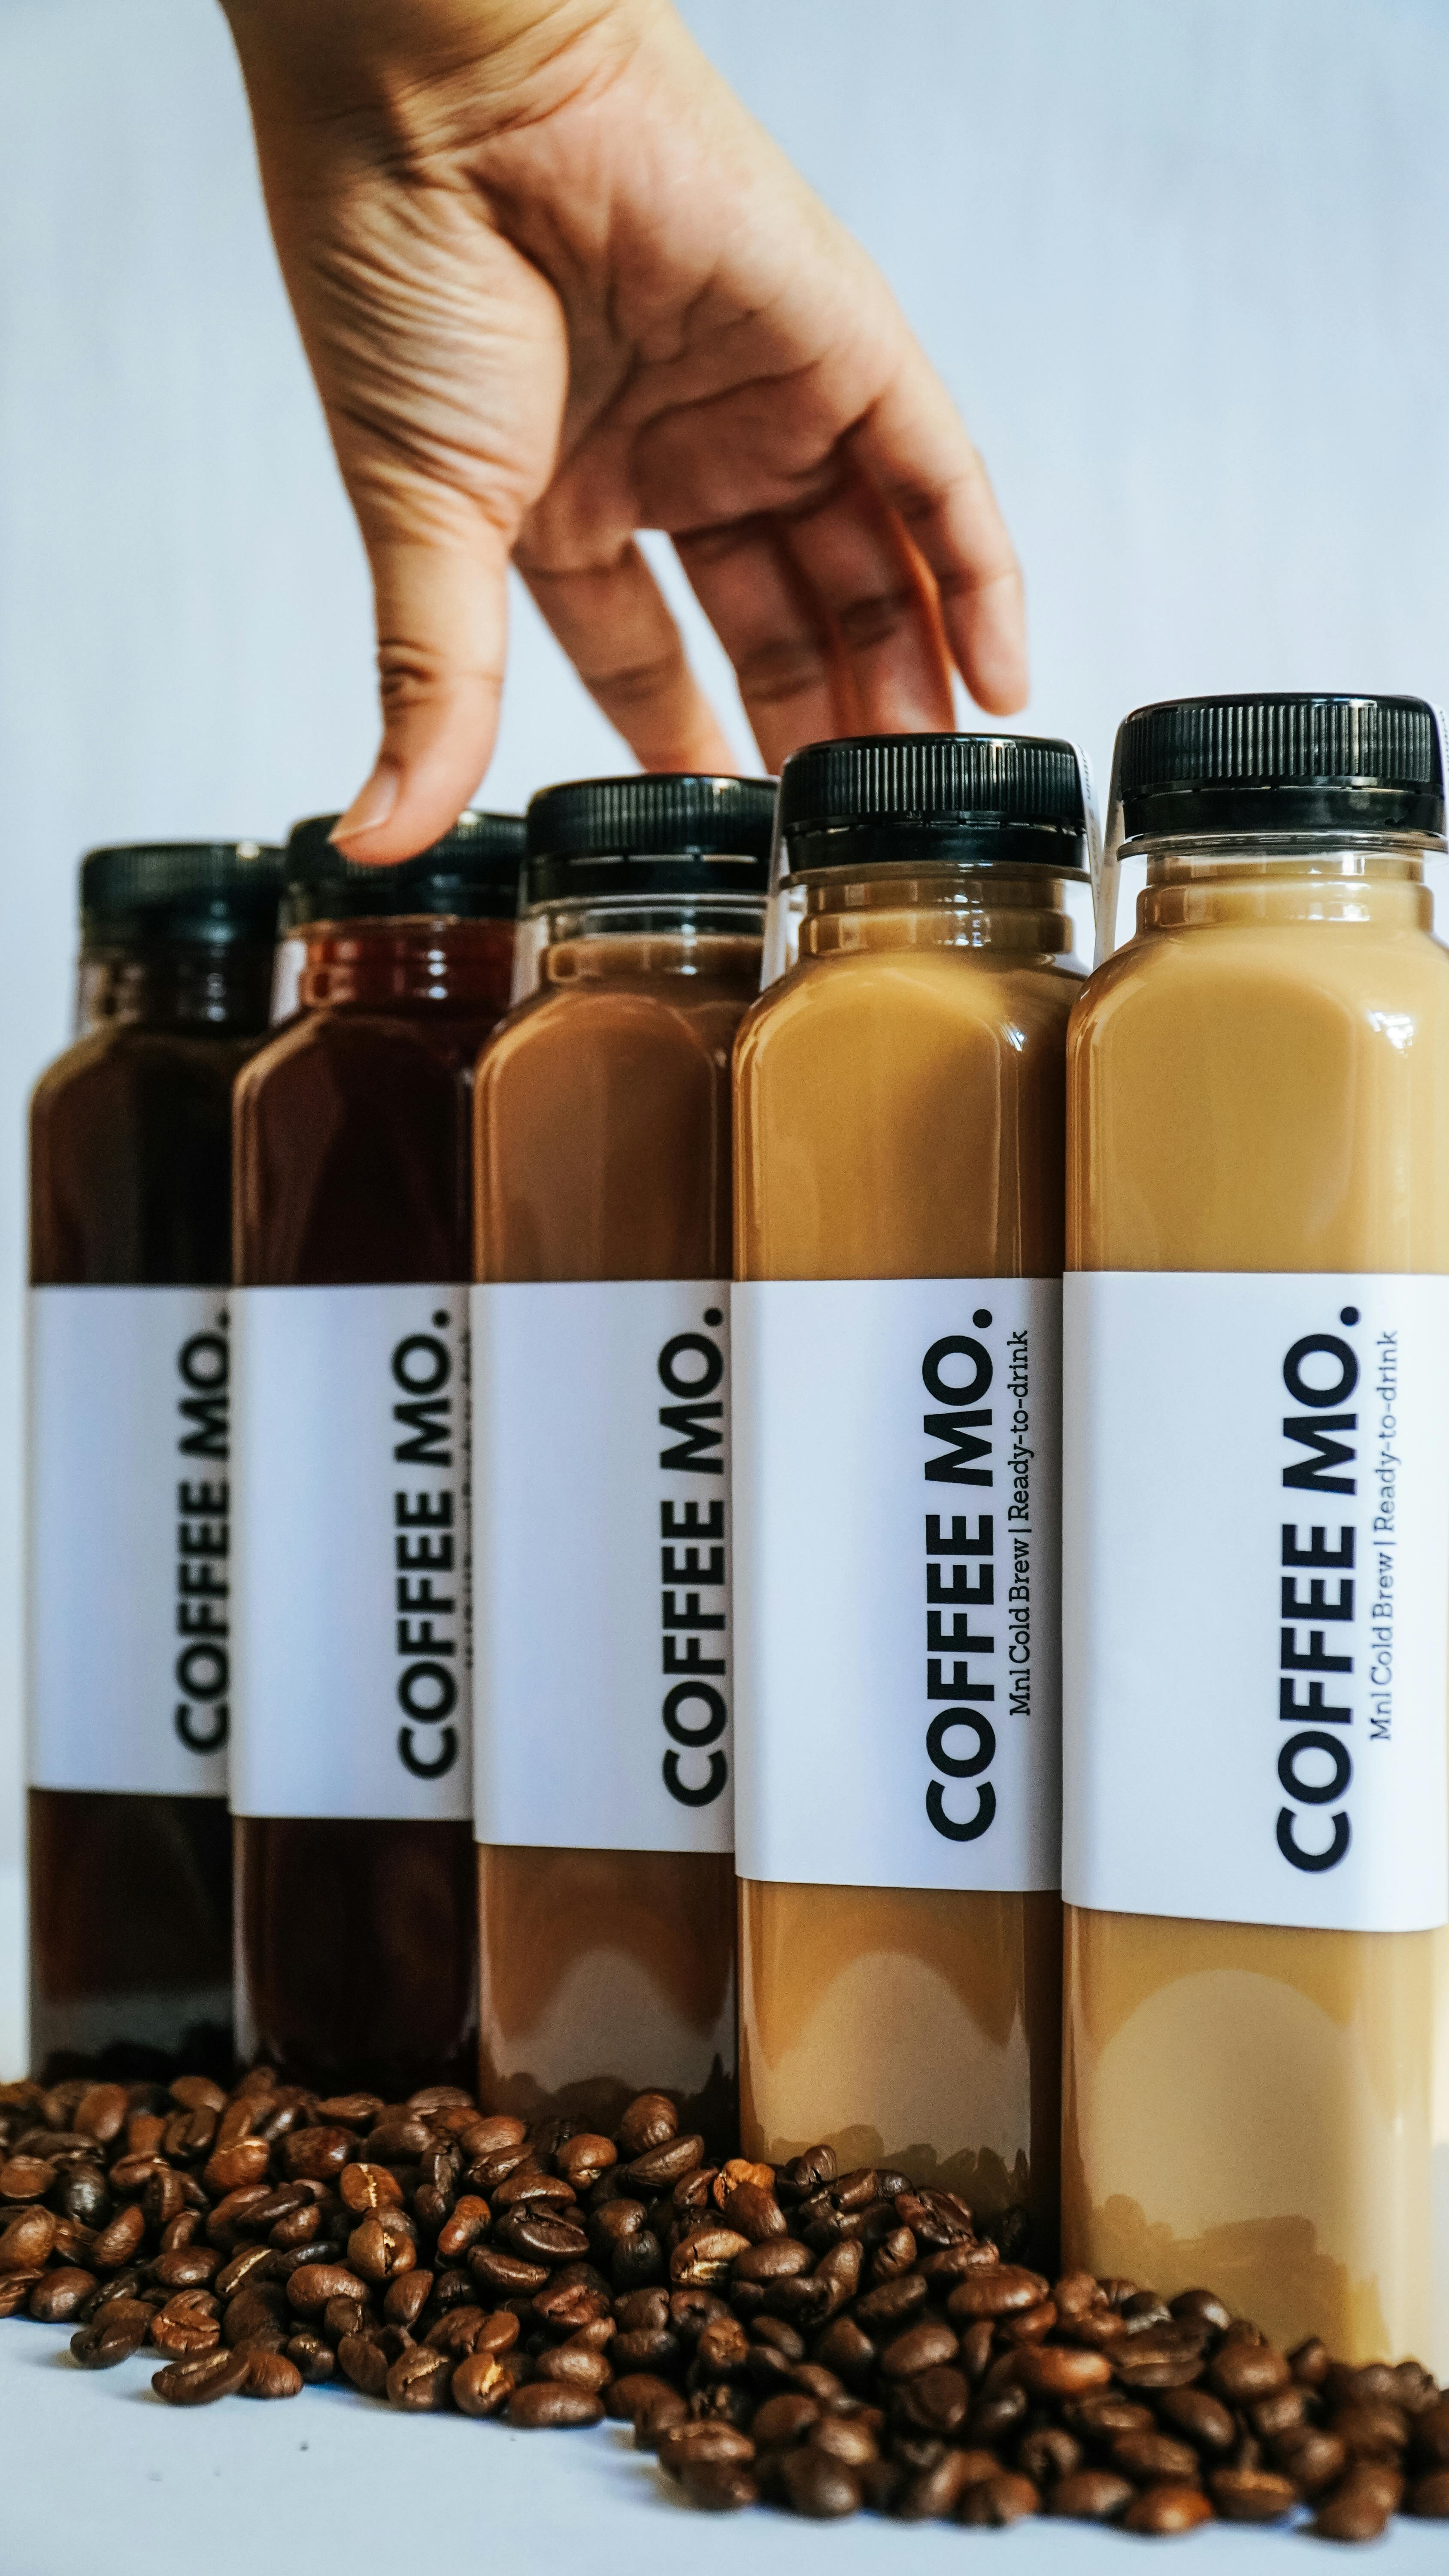 crop person touching bottles with various coffee drinks